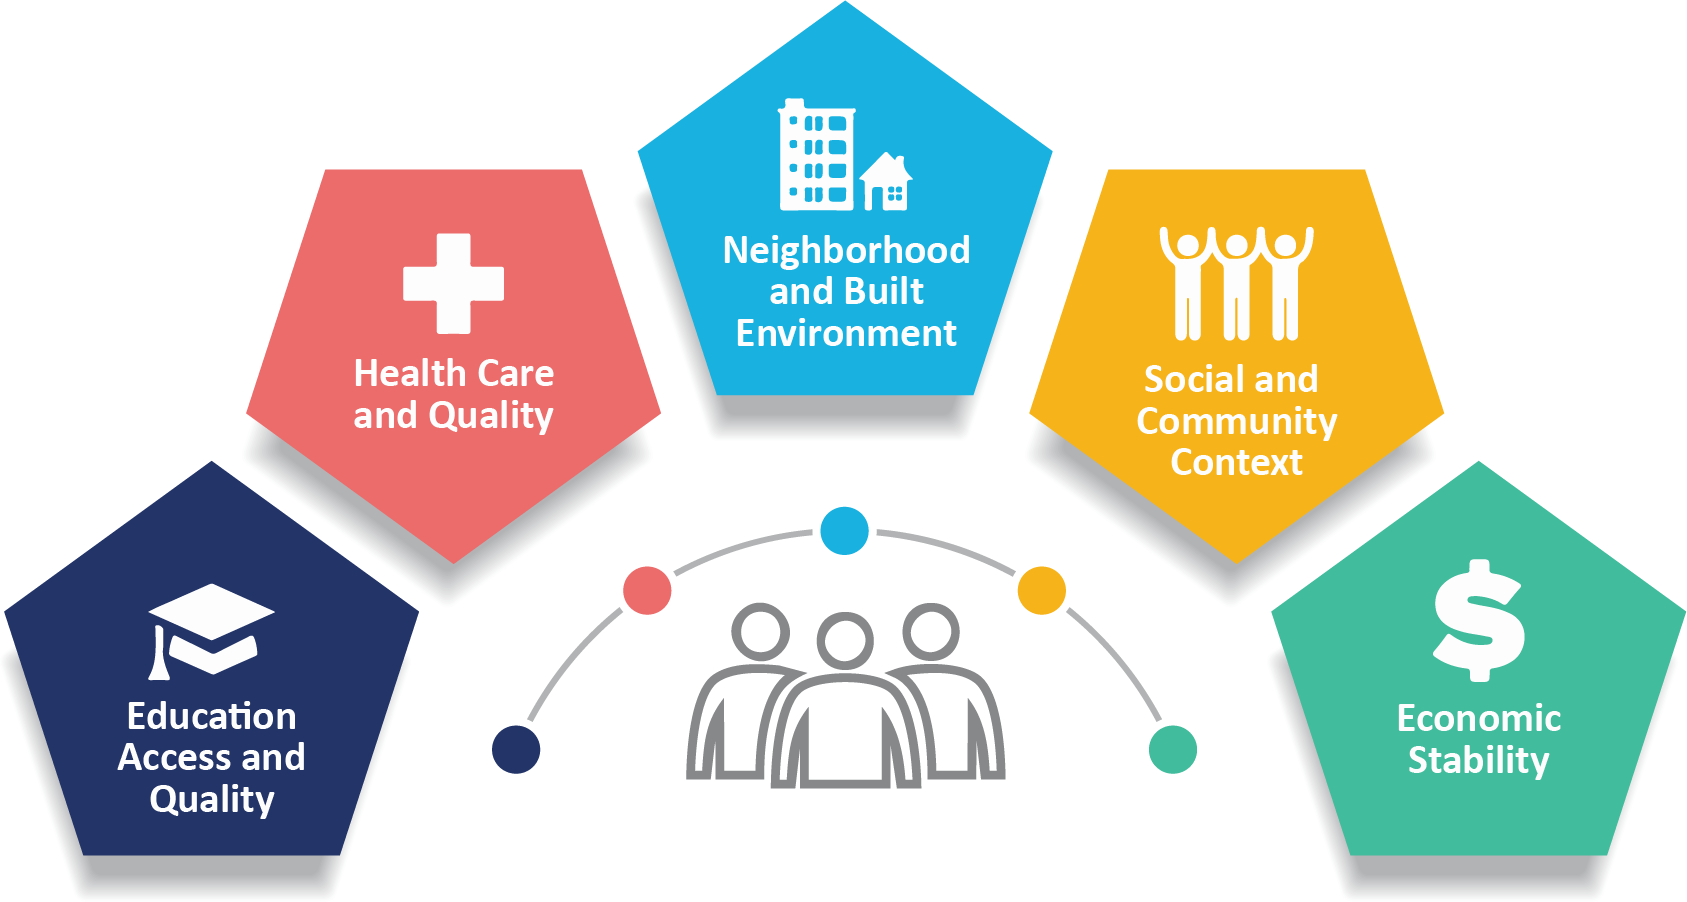 Image showing the 5 domains of the social determinants of health: 1) education access and quality, 2) healthcare access and quality, 3) neighborhood and built environment, 4) social and community context and 5) economic stability.